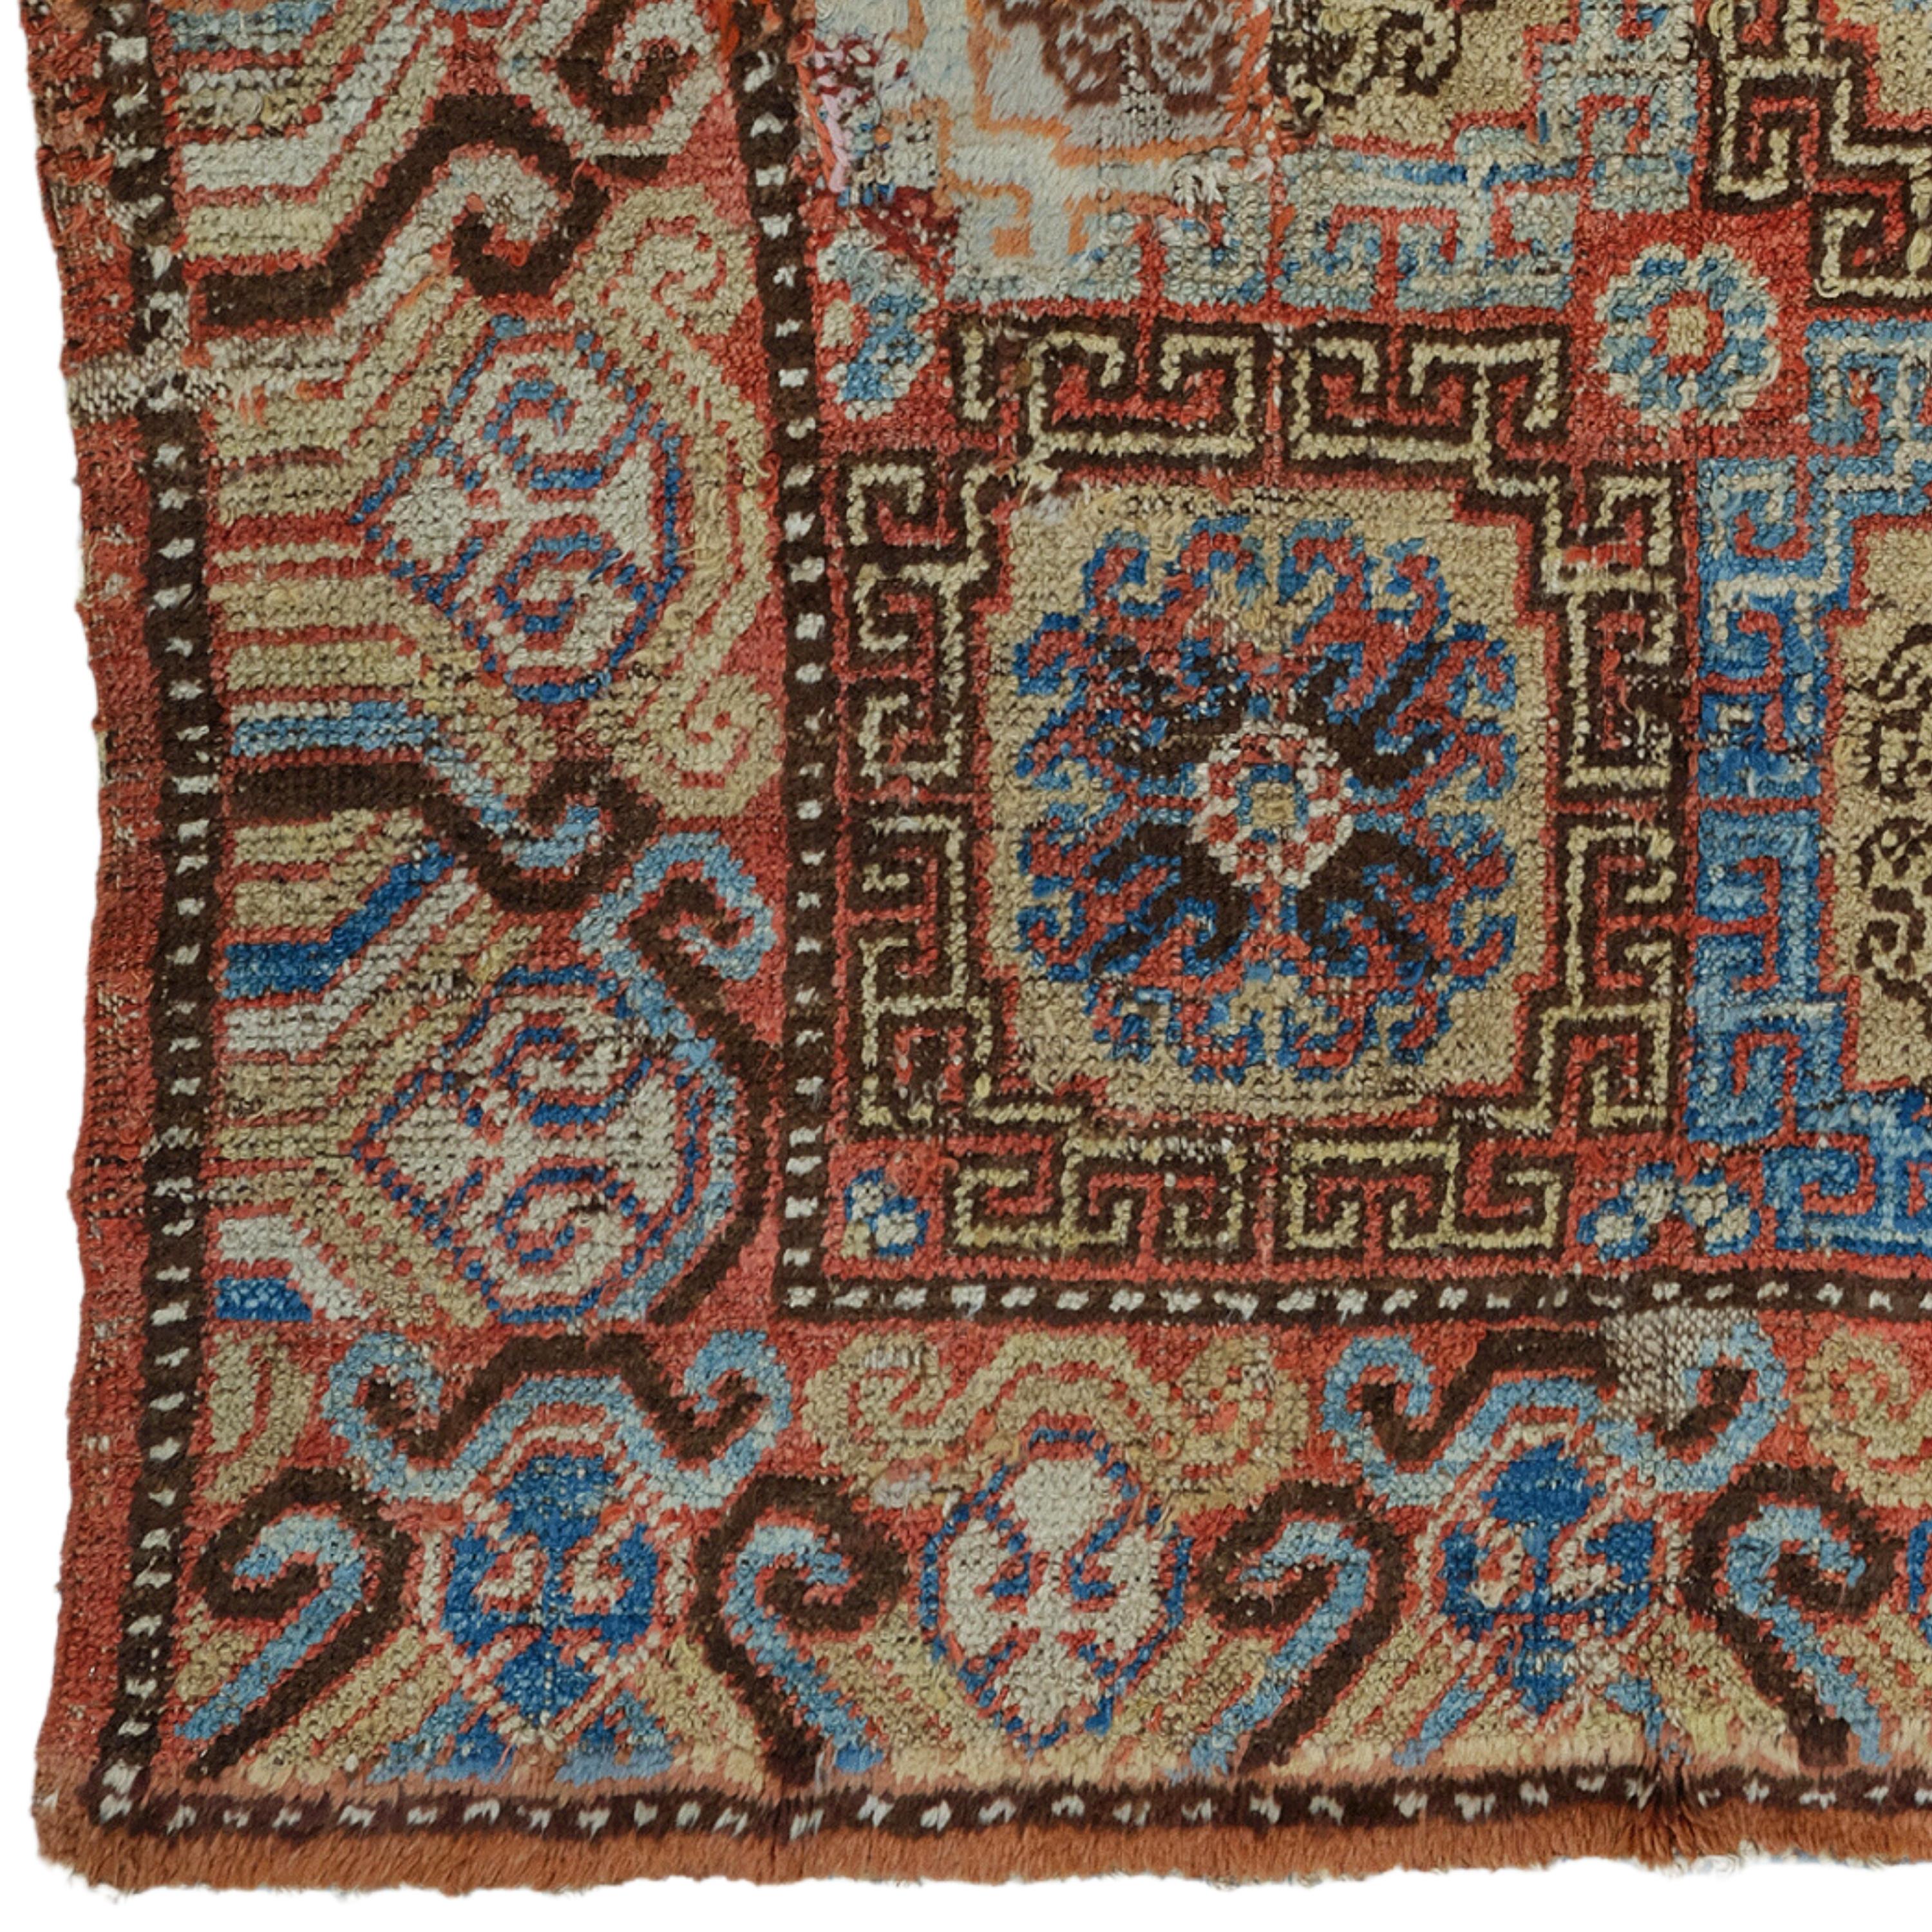 19th Century Khotan Rug - Handwoven Rug

This elegant 19th-century Khotan rug adds nobility to any space with its historical richness and sophisticated design. This handmade work, measuring 150x238 cm, dazzles with its carefully woven details and